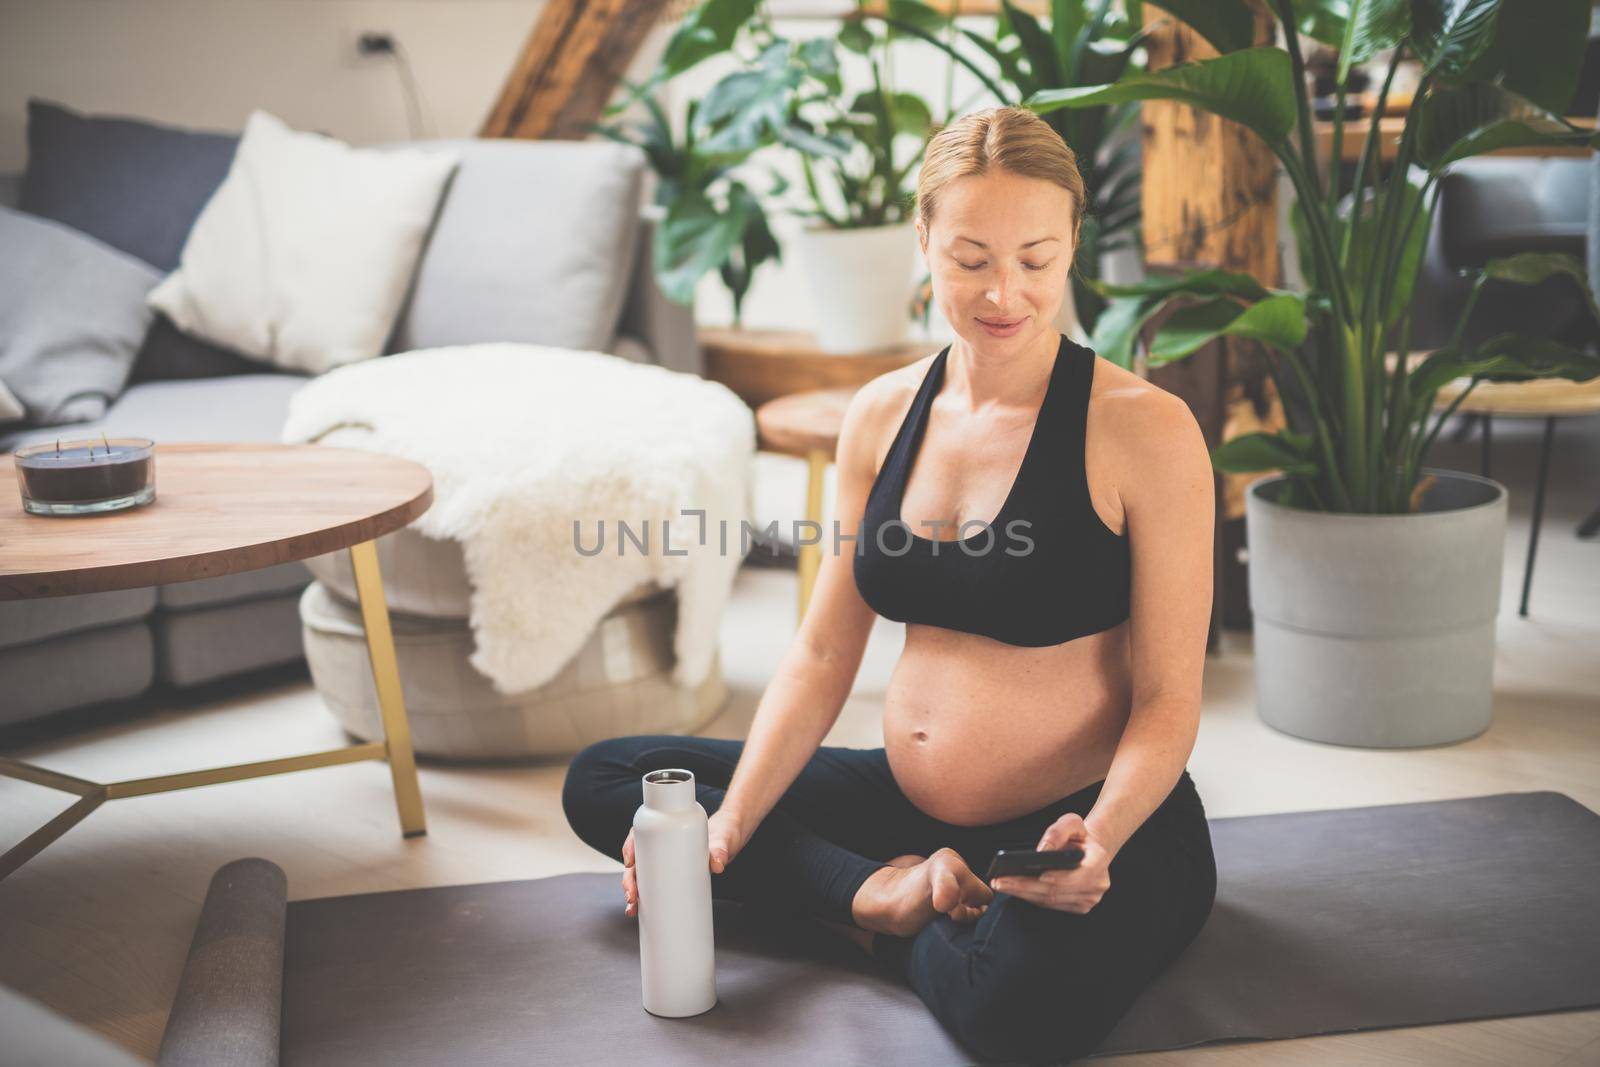 Young happy and cheerful beautiful pregnant woman chating to family and friends on mobile phone while staying fit, sporty and active on her maternity leave. Motherhood, pregnancy, yoga concept